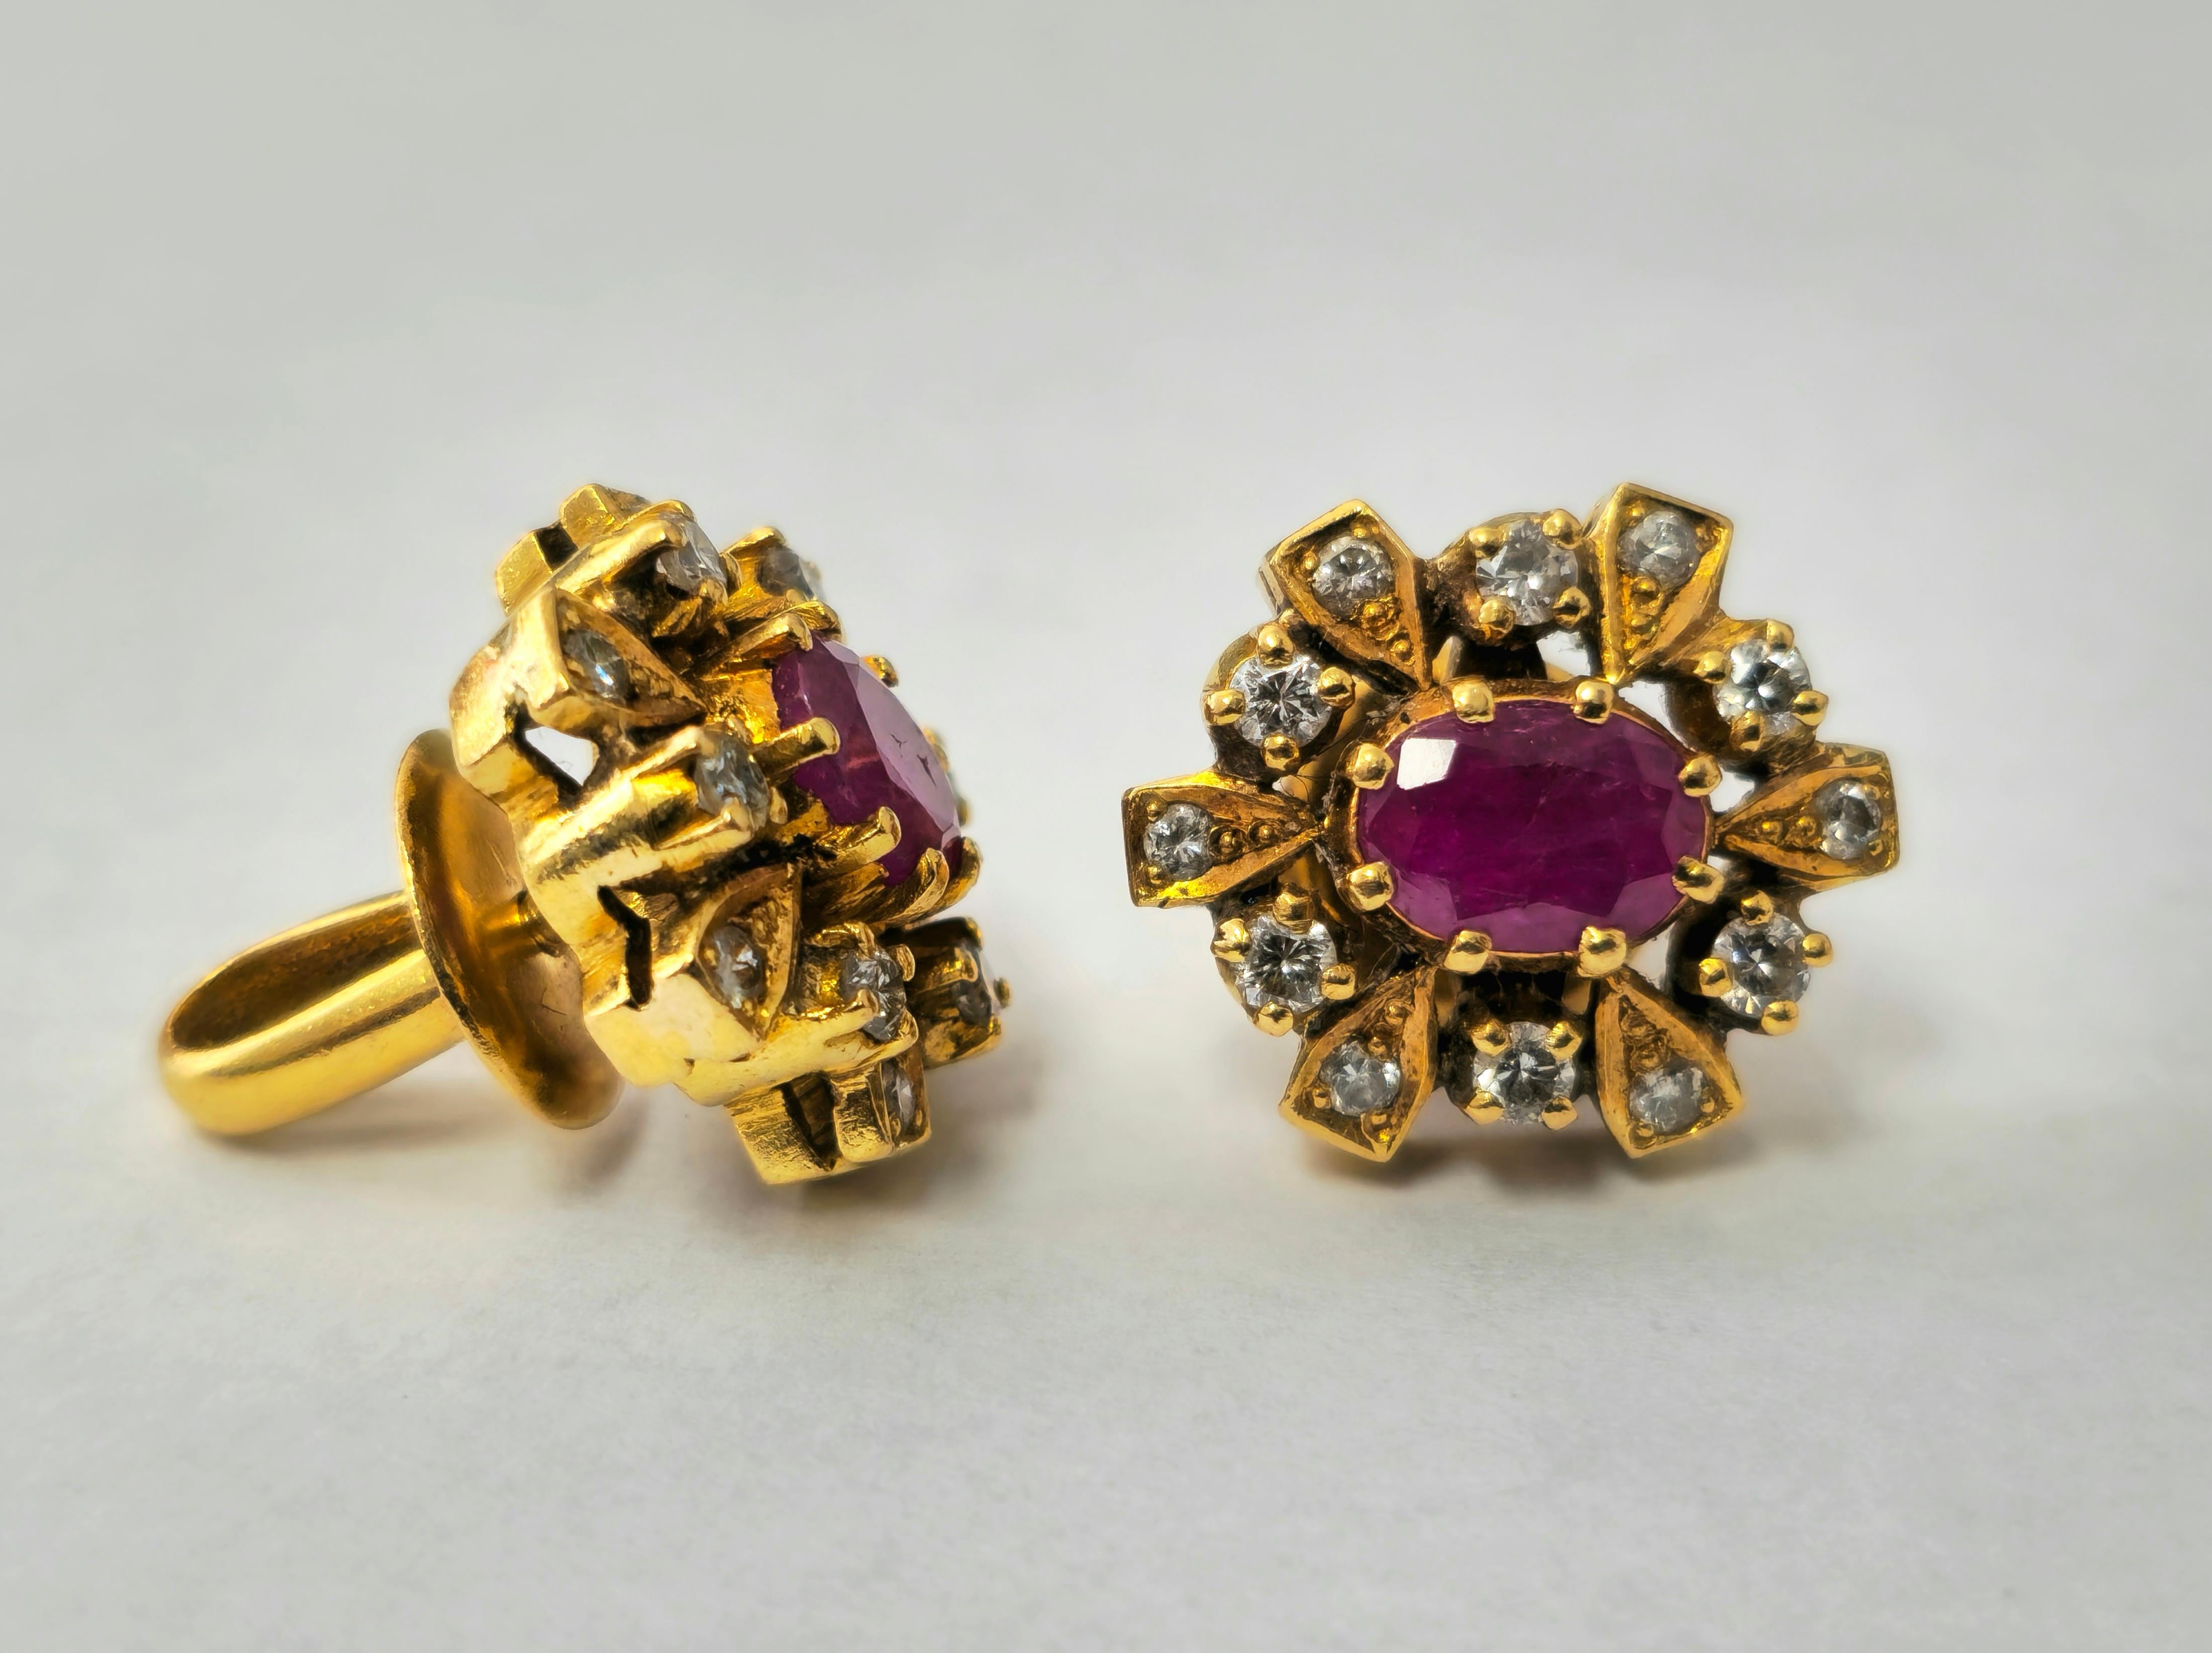 Fashioned in 18K yellow gold, these exquisite earrings feature a stunning 1.20 carat oval-shaped ruby, surrounded by a total of 1.03 carats of round single-cut diamonds. The diamonds boast SI1 clarity and G color, accentuating the allure of the